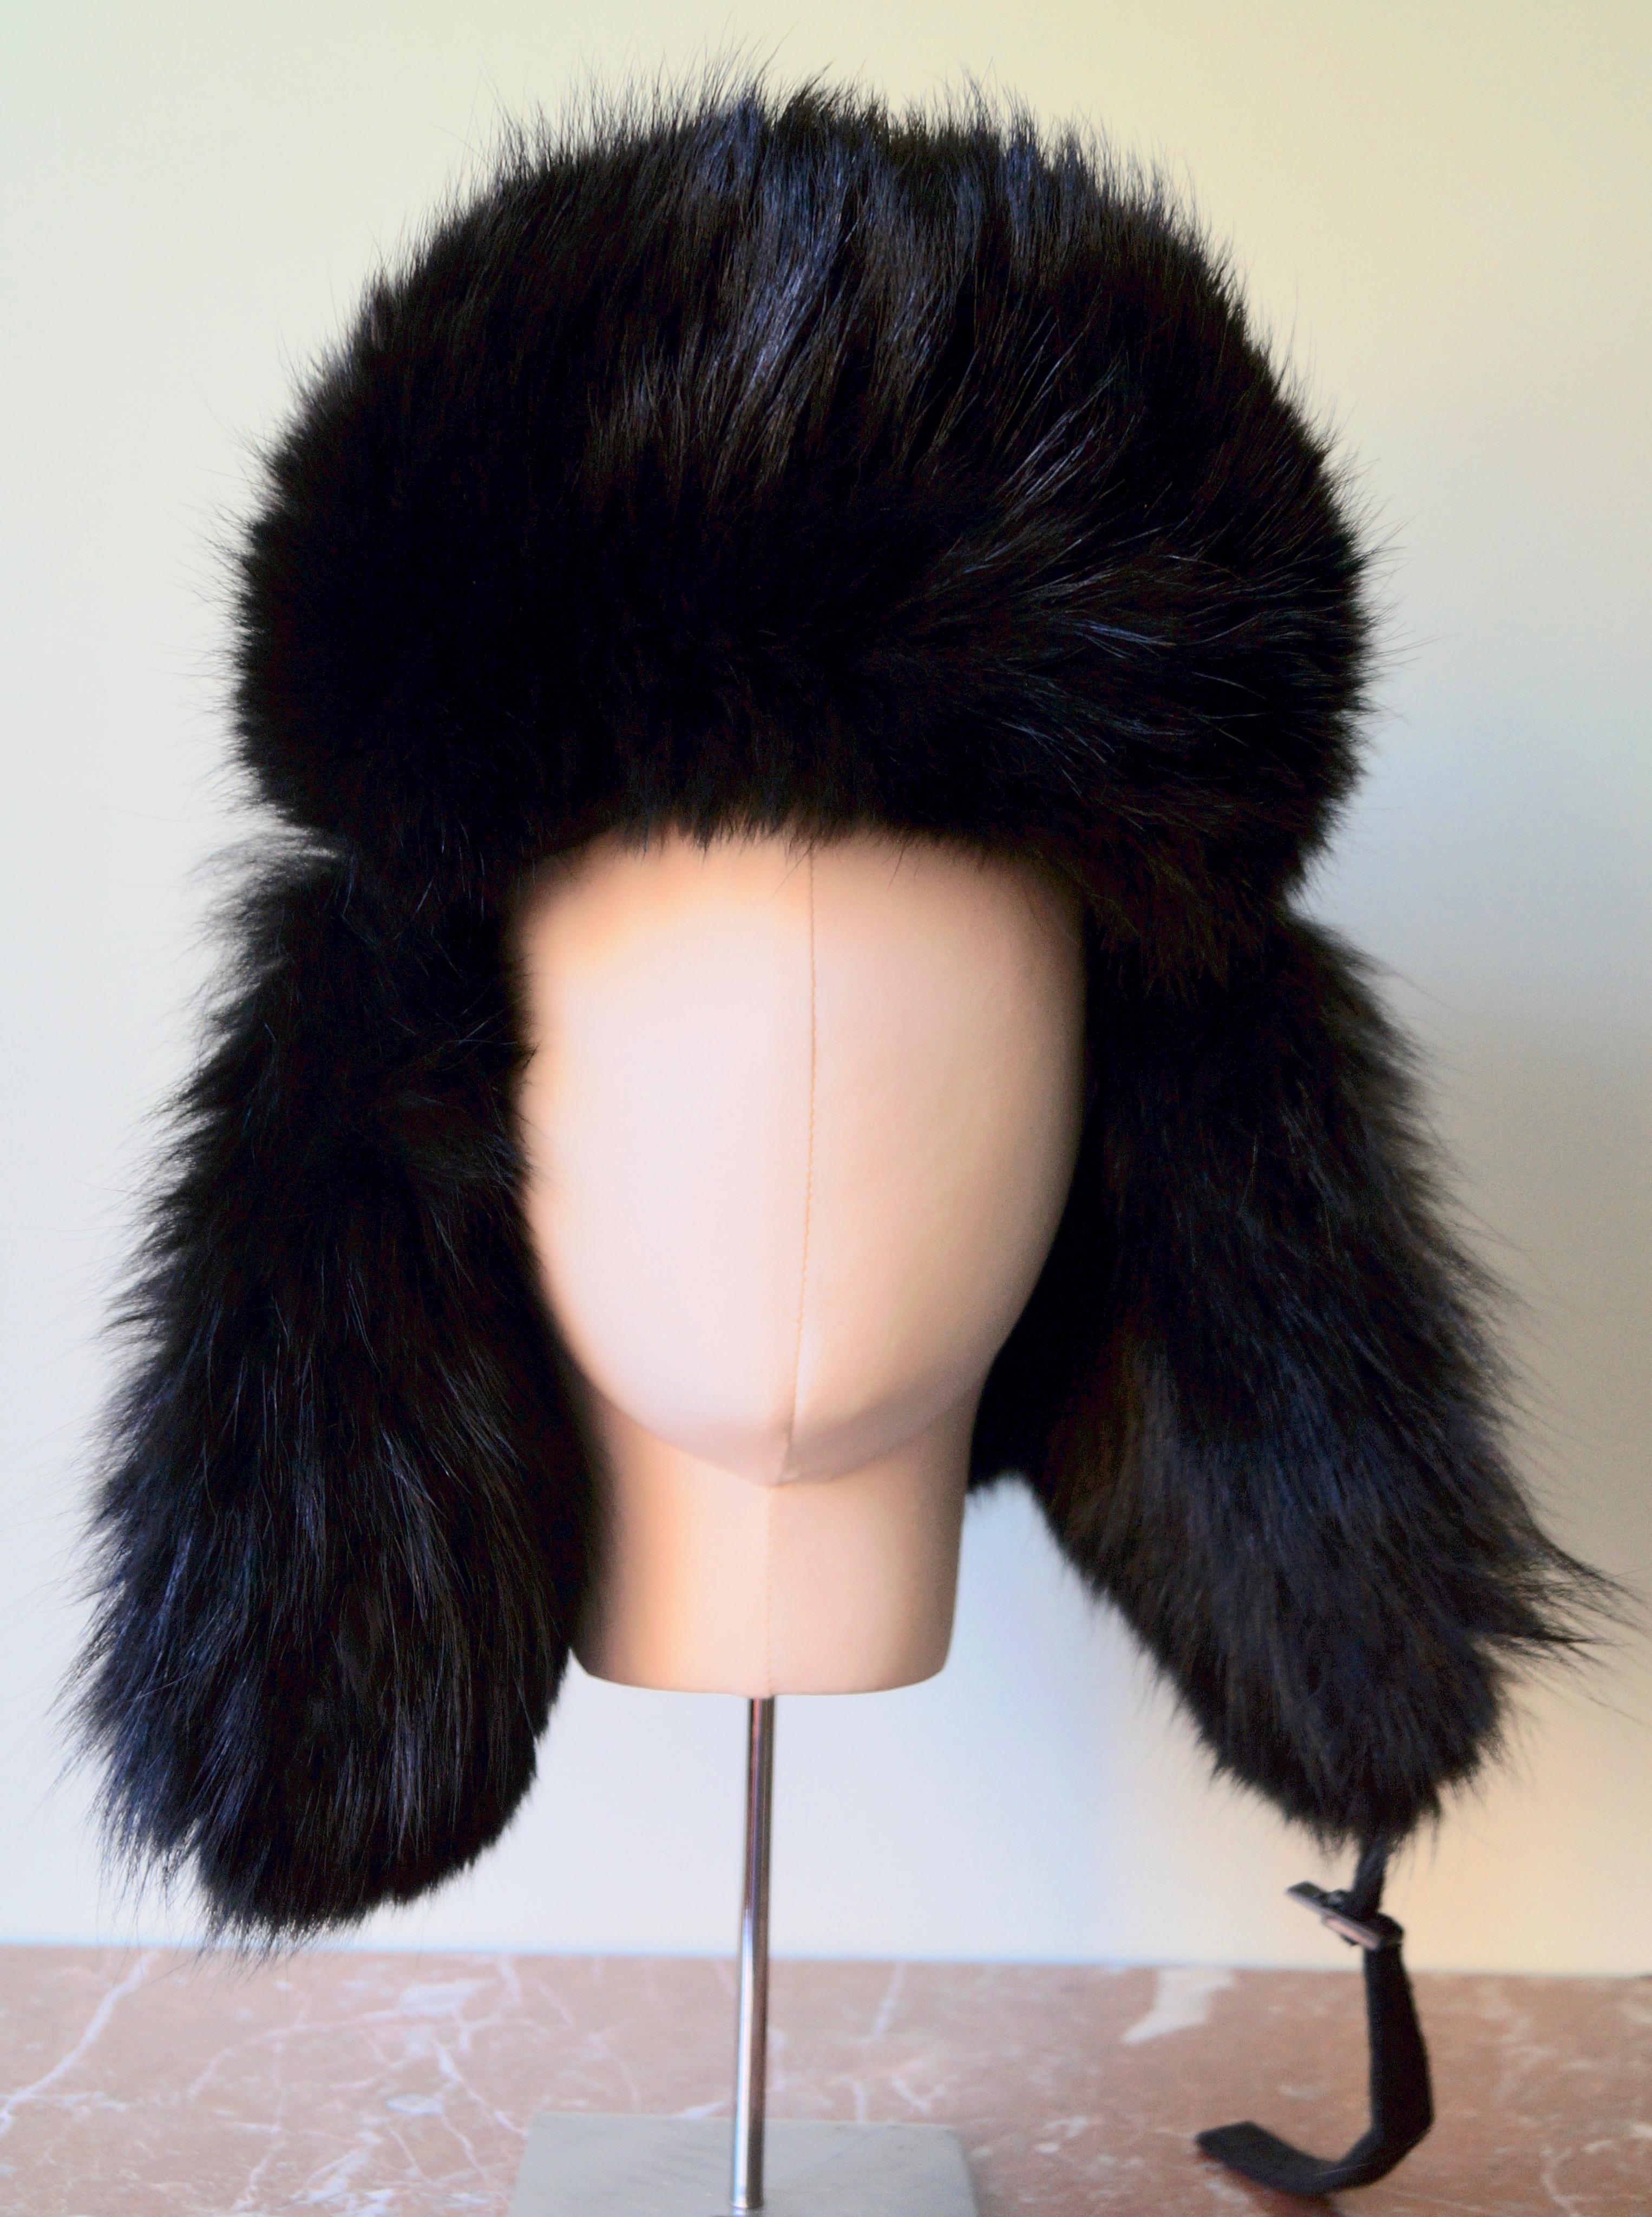 Ralph Lauren Collection
Black CHAPKA 
 Wool, angora and cashmere 
Trim: 100% coyote
Size MM
Made in Canada
Fur provenance Canada
Excellent condition 